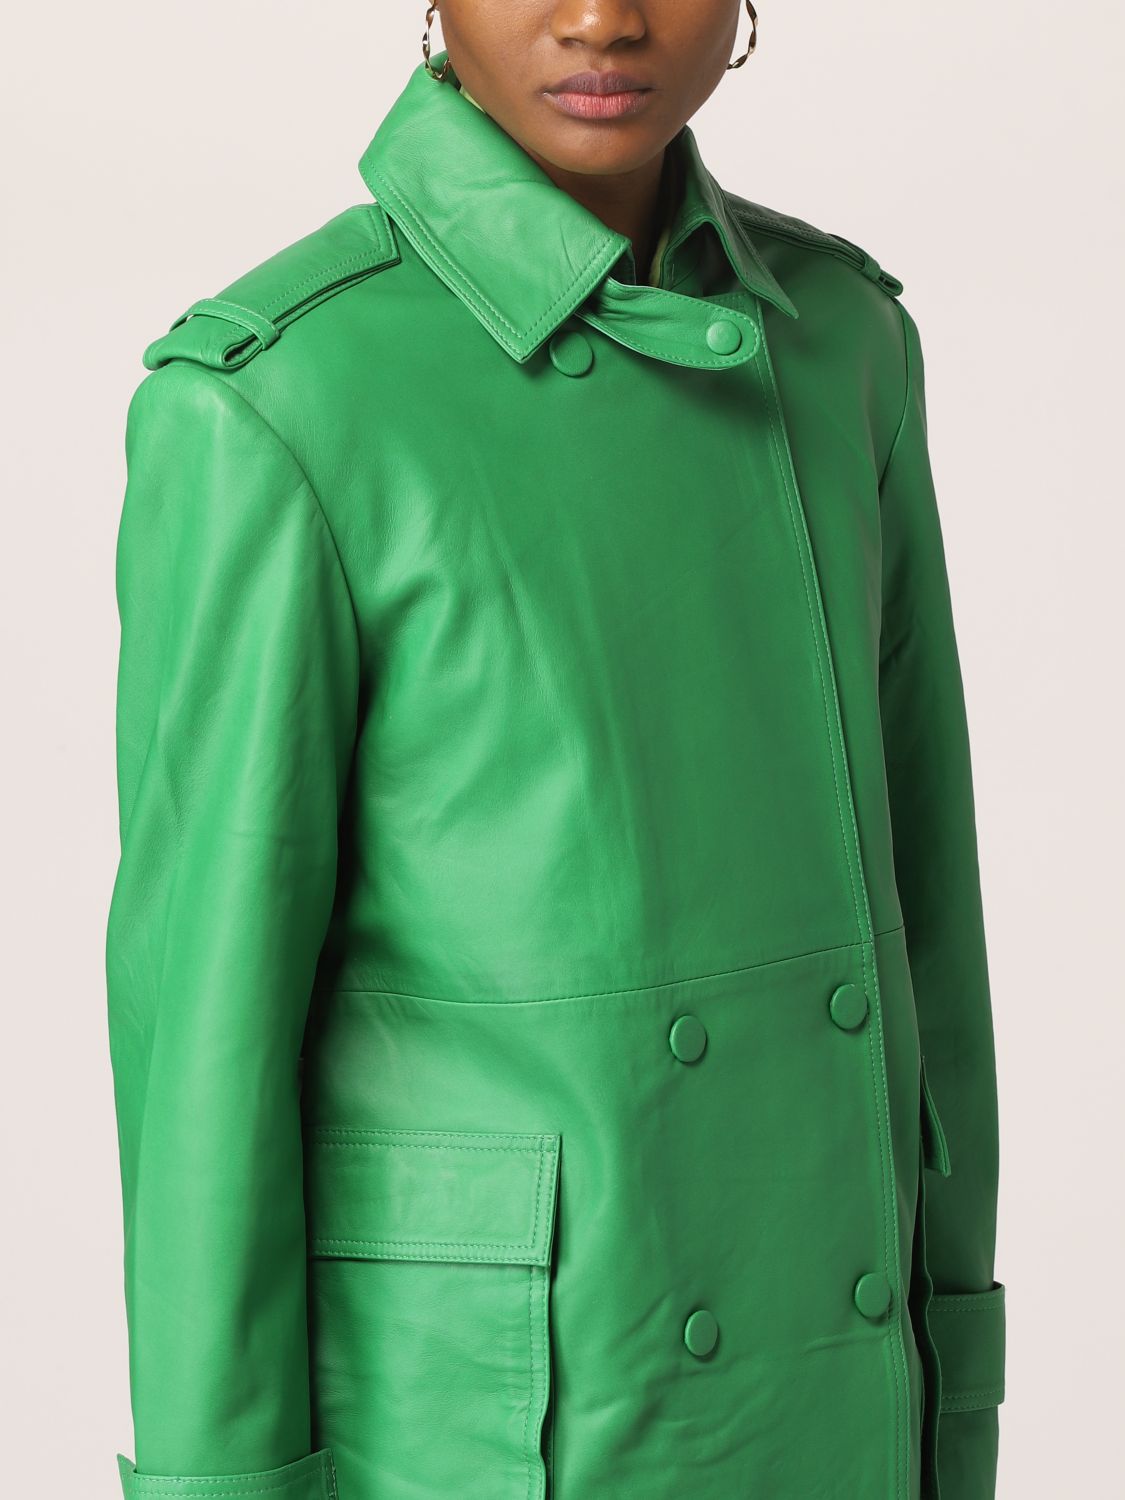 Trench coat Remain: Remain leather trench coat green 5